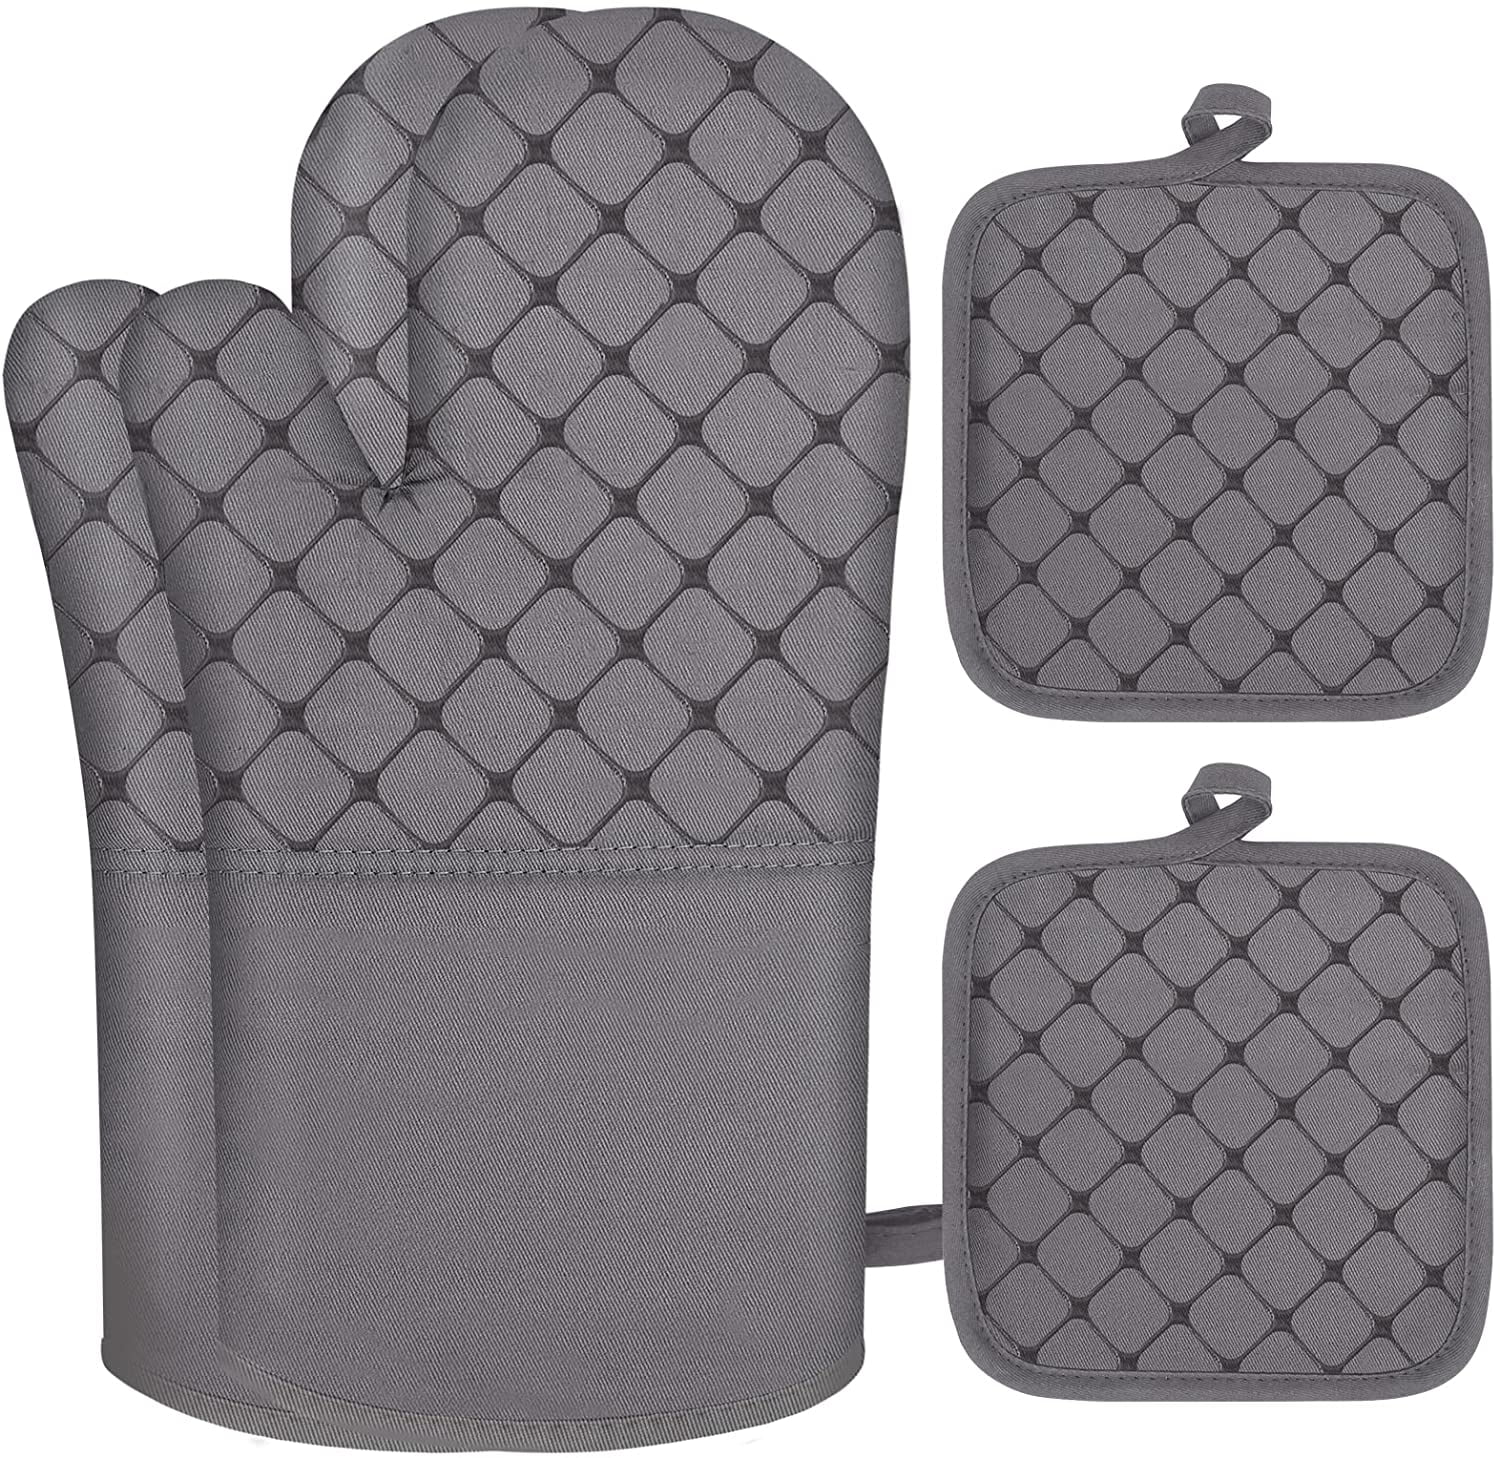 4pcs/set Grey Oven Mitts And Pot Holders, High Heat Resistant (up To 500  Degrees) Extra Thick Long Kitchen Oven Glove For Cooking